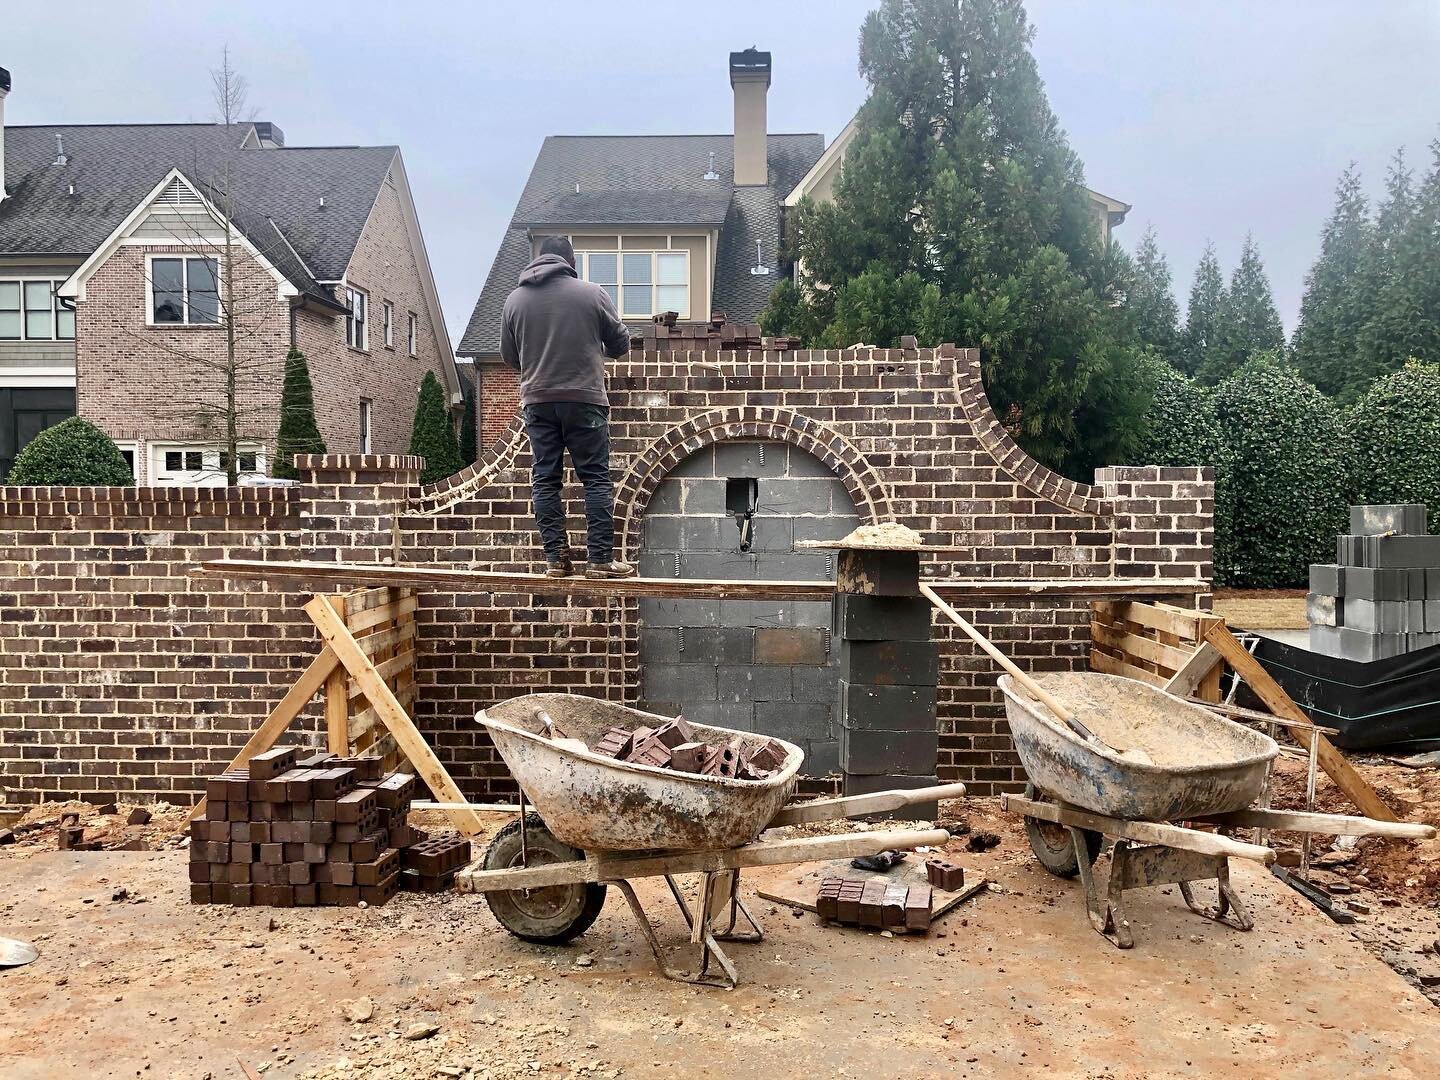 Let&rsquo;s take a look at one of our favorite features of the home we checked in on back in March! This Berkeley Lake home is going to have a custom-designed fountain as a focal point for the backyard garden! 
We love to see the progress on projects